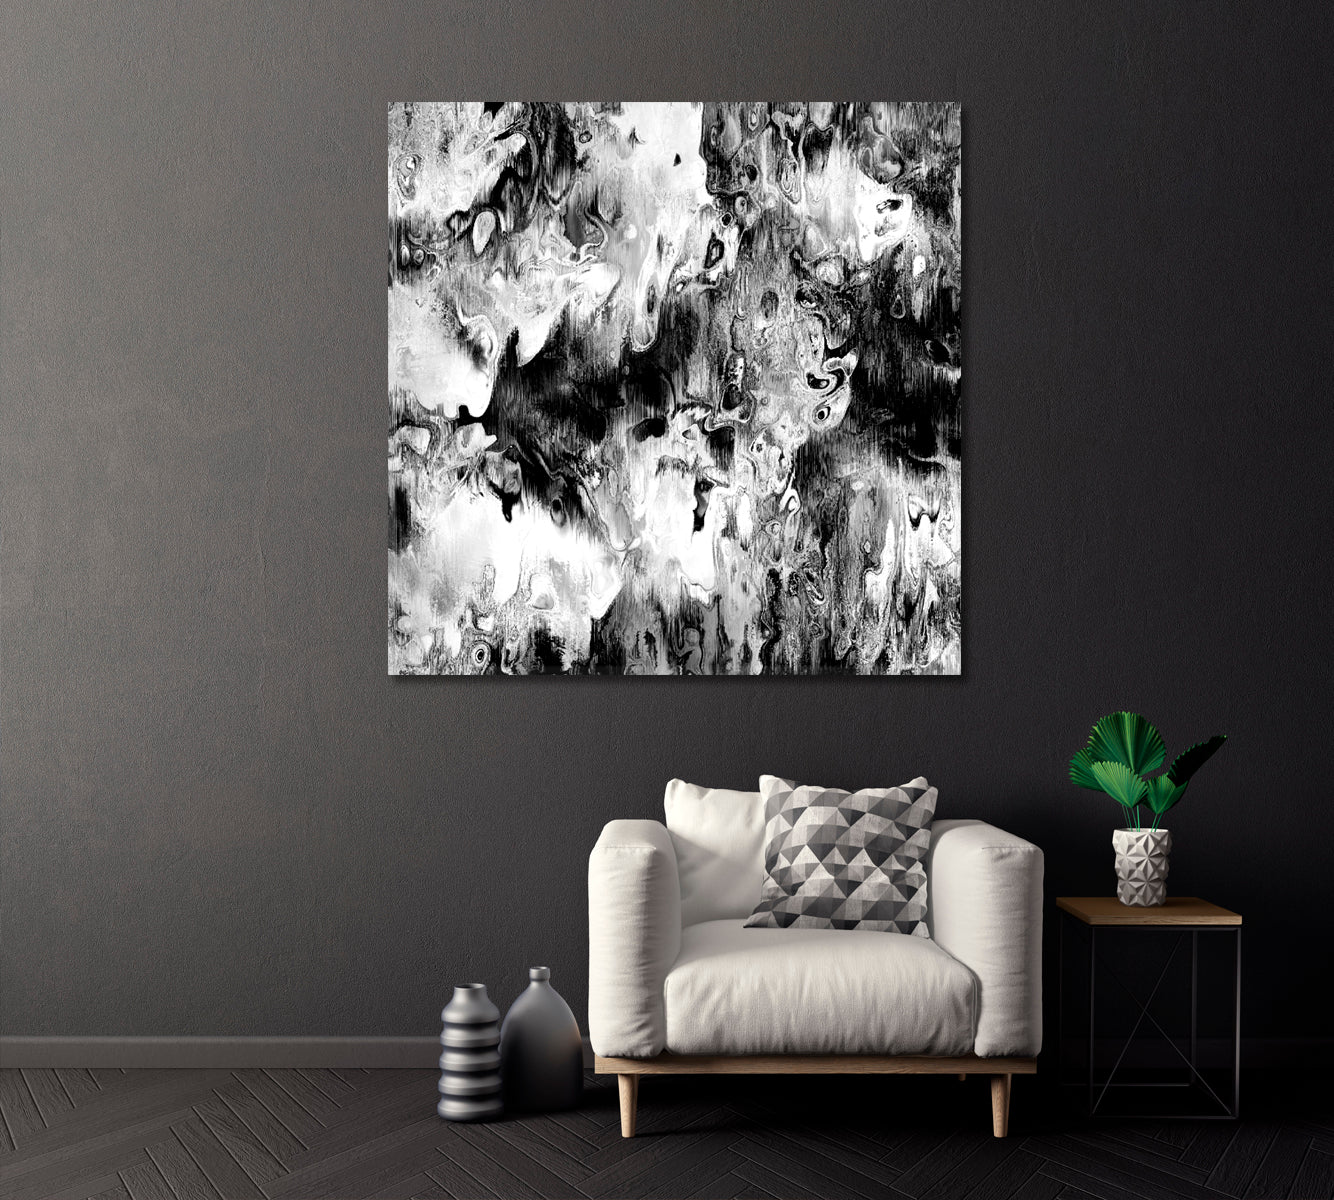 Abstract Monochrome Black and White Waves Canvas Print ArtLexy   